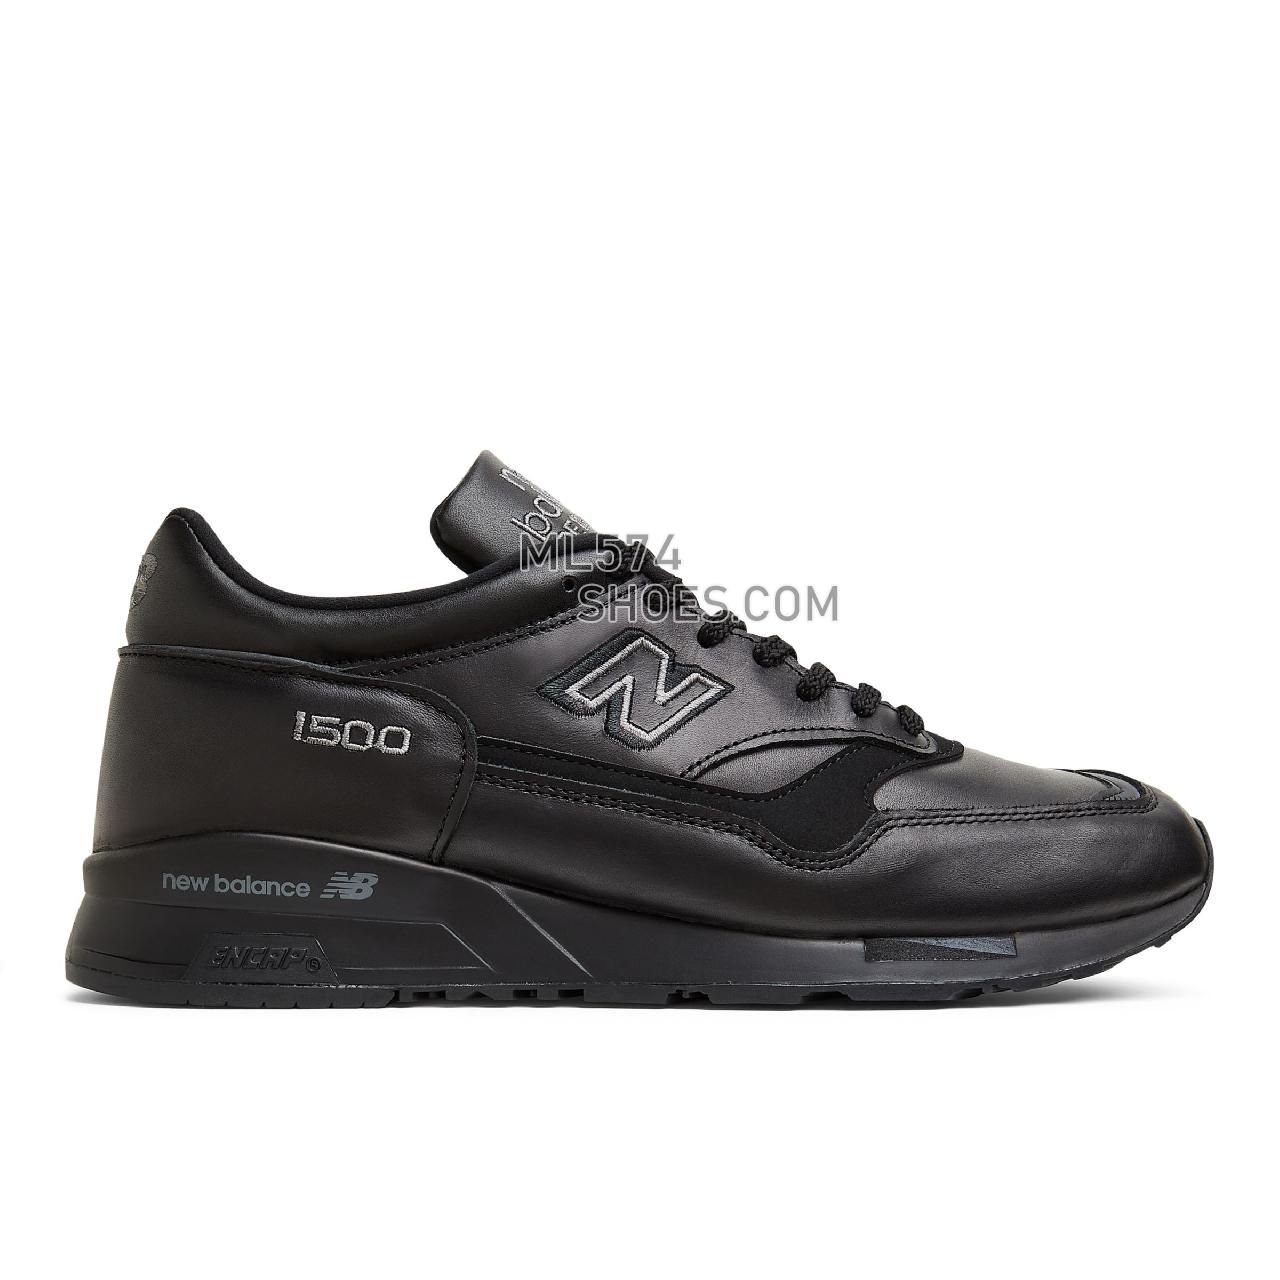 New Balance Made in UK 1500 - Men's Made in USA And UK Sneakers - Black with Dark Grey - M1500TK